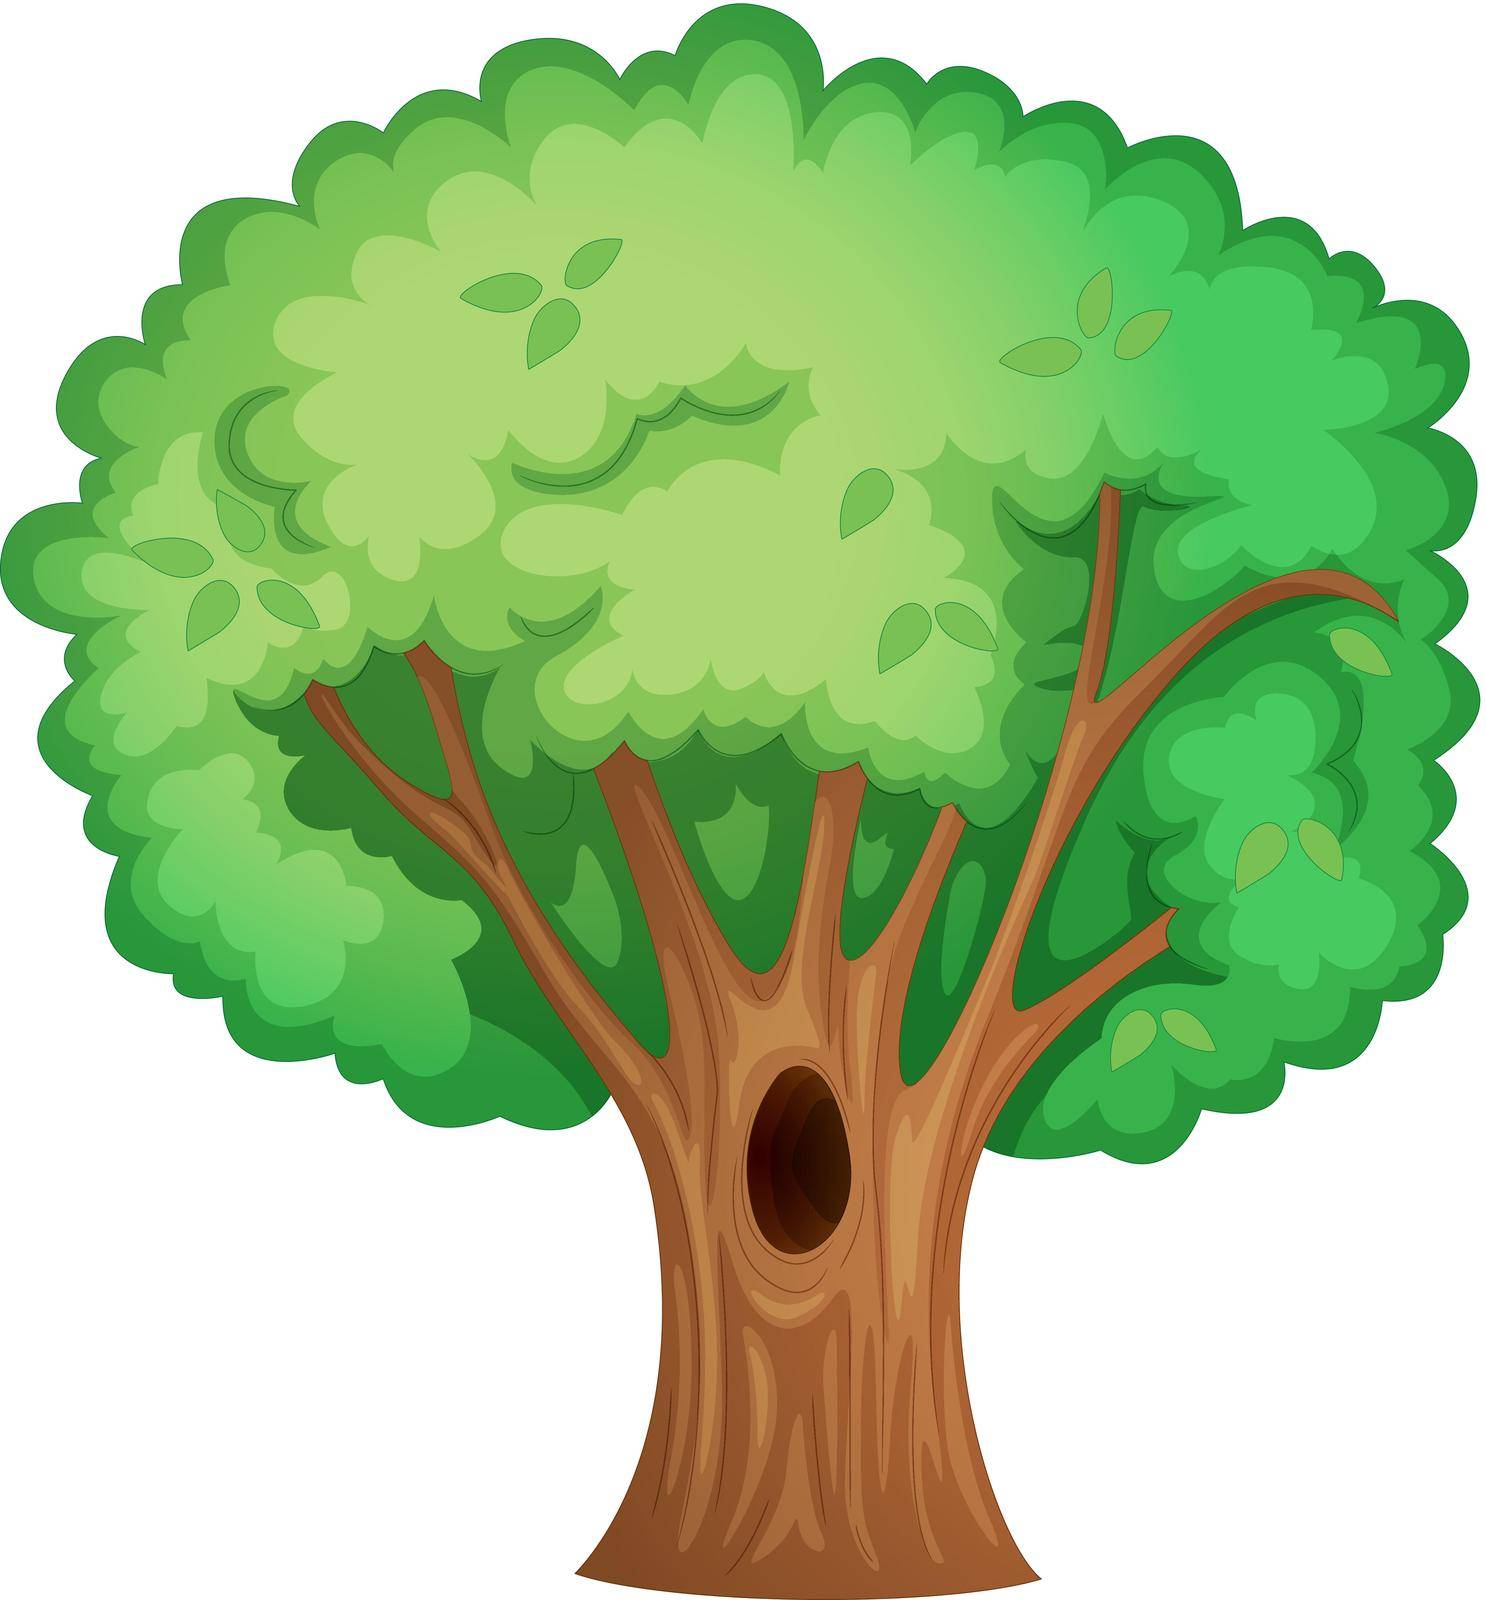 Illustration of isolated tree with hollow